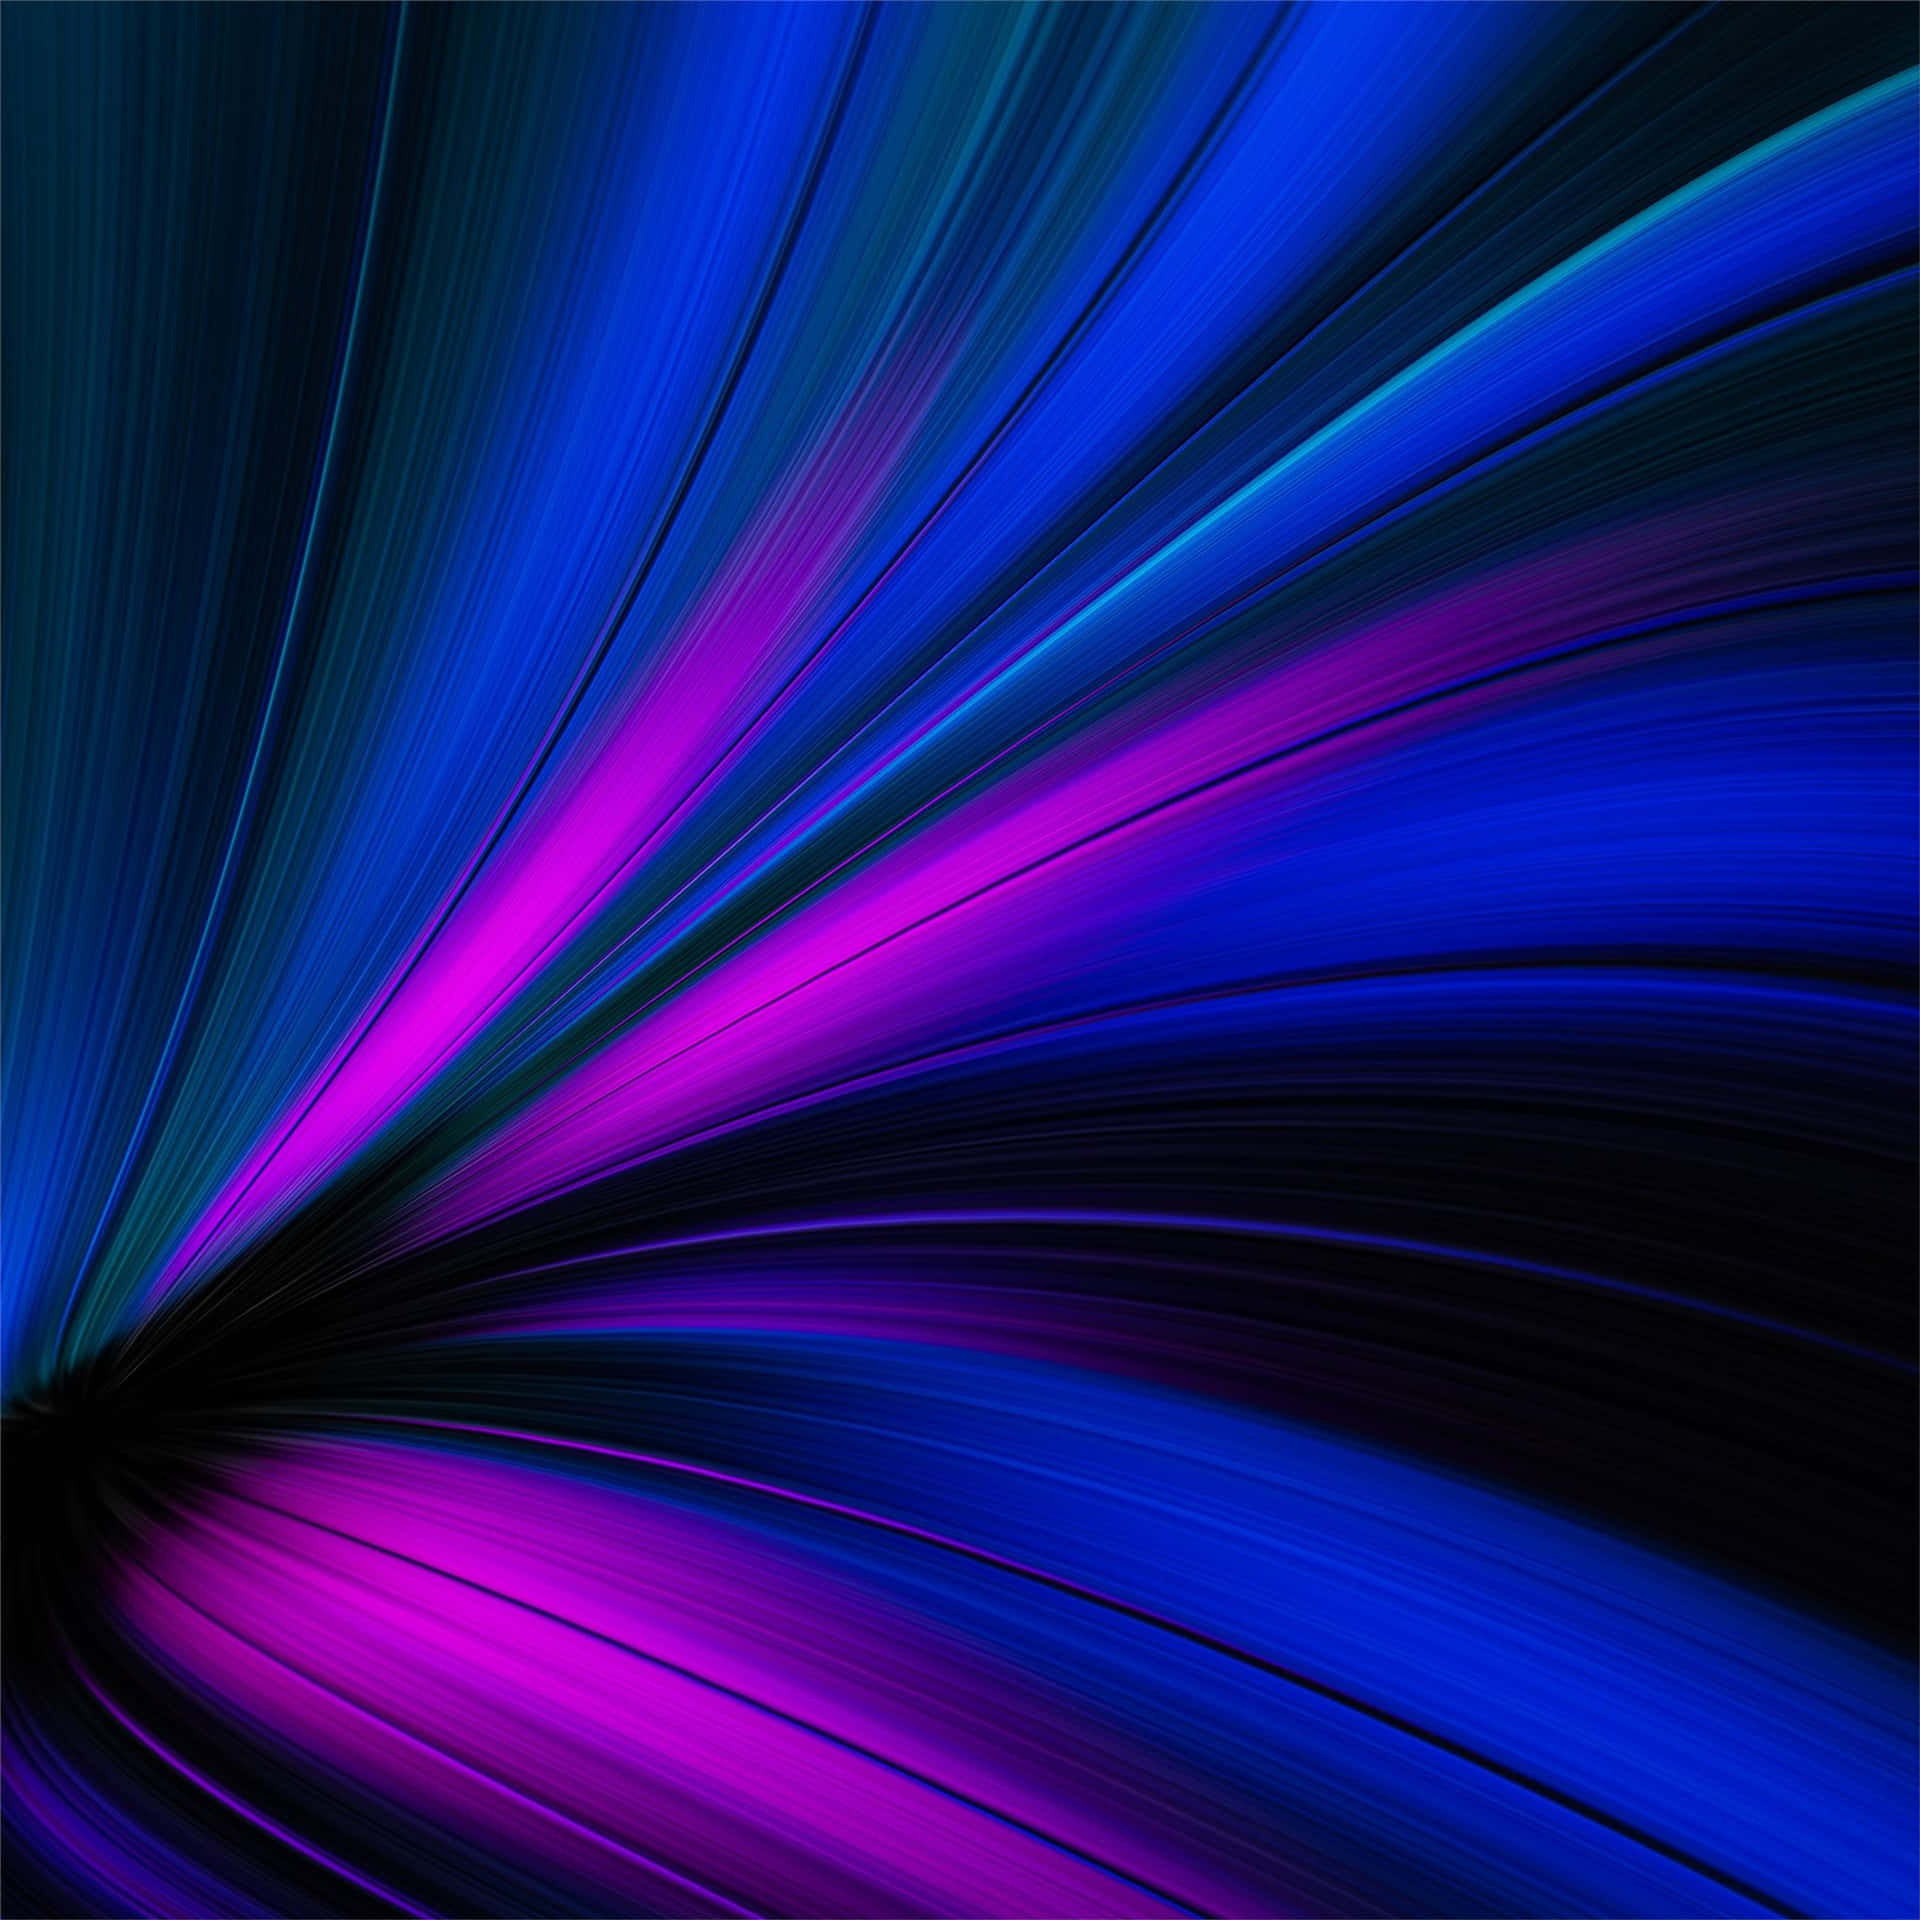 A Vibrant Display of Blue and Purple Wallpaper